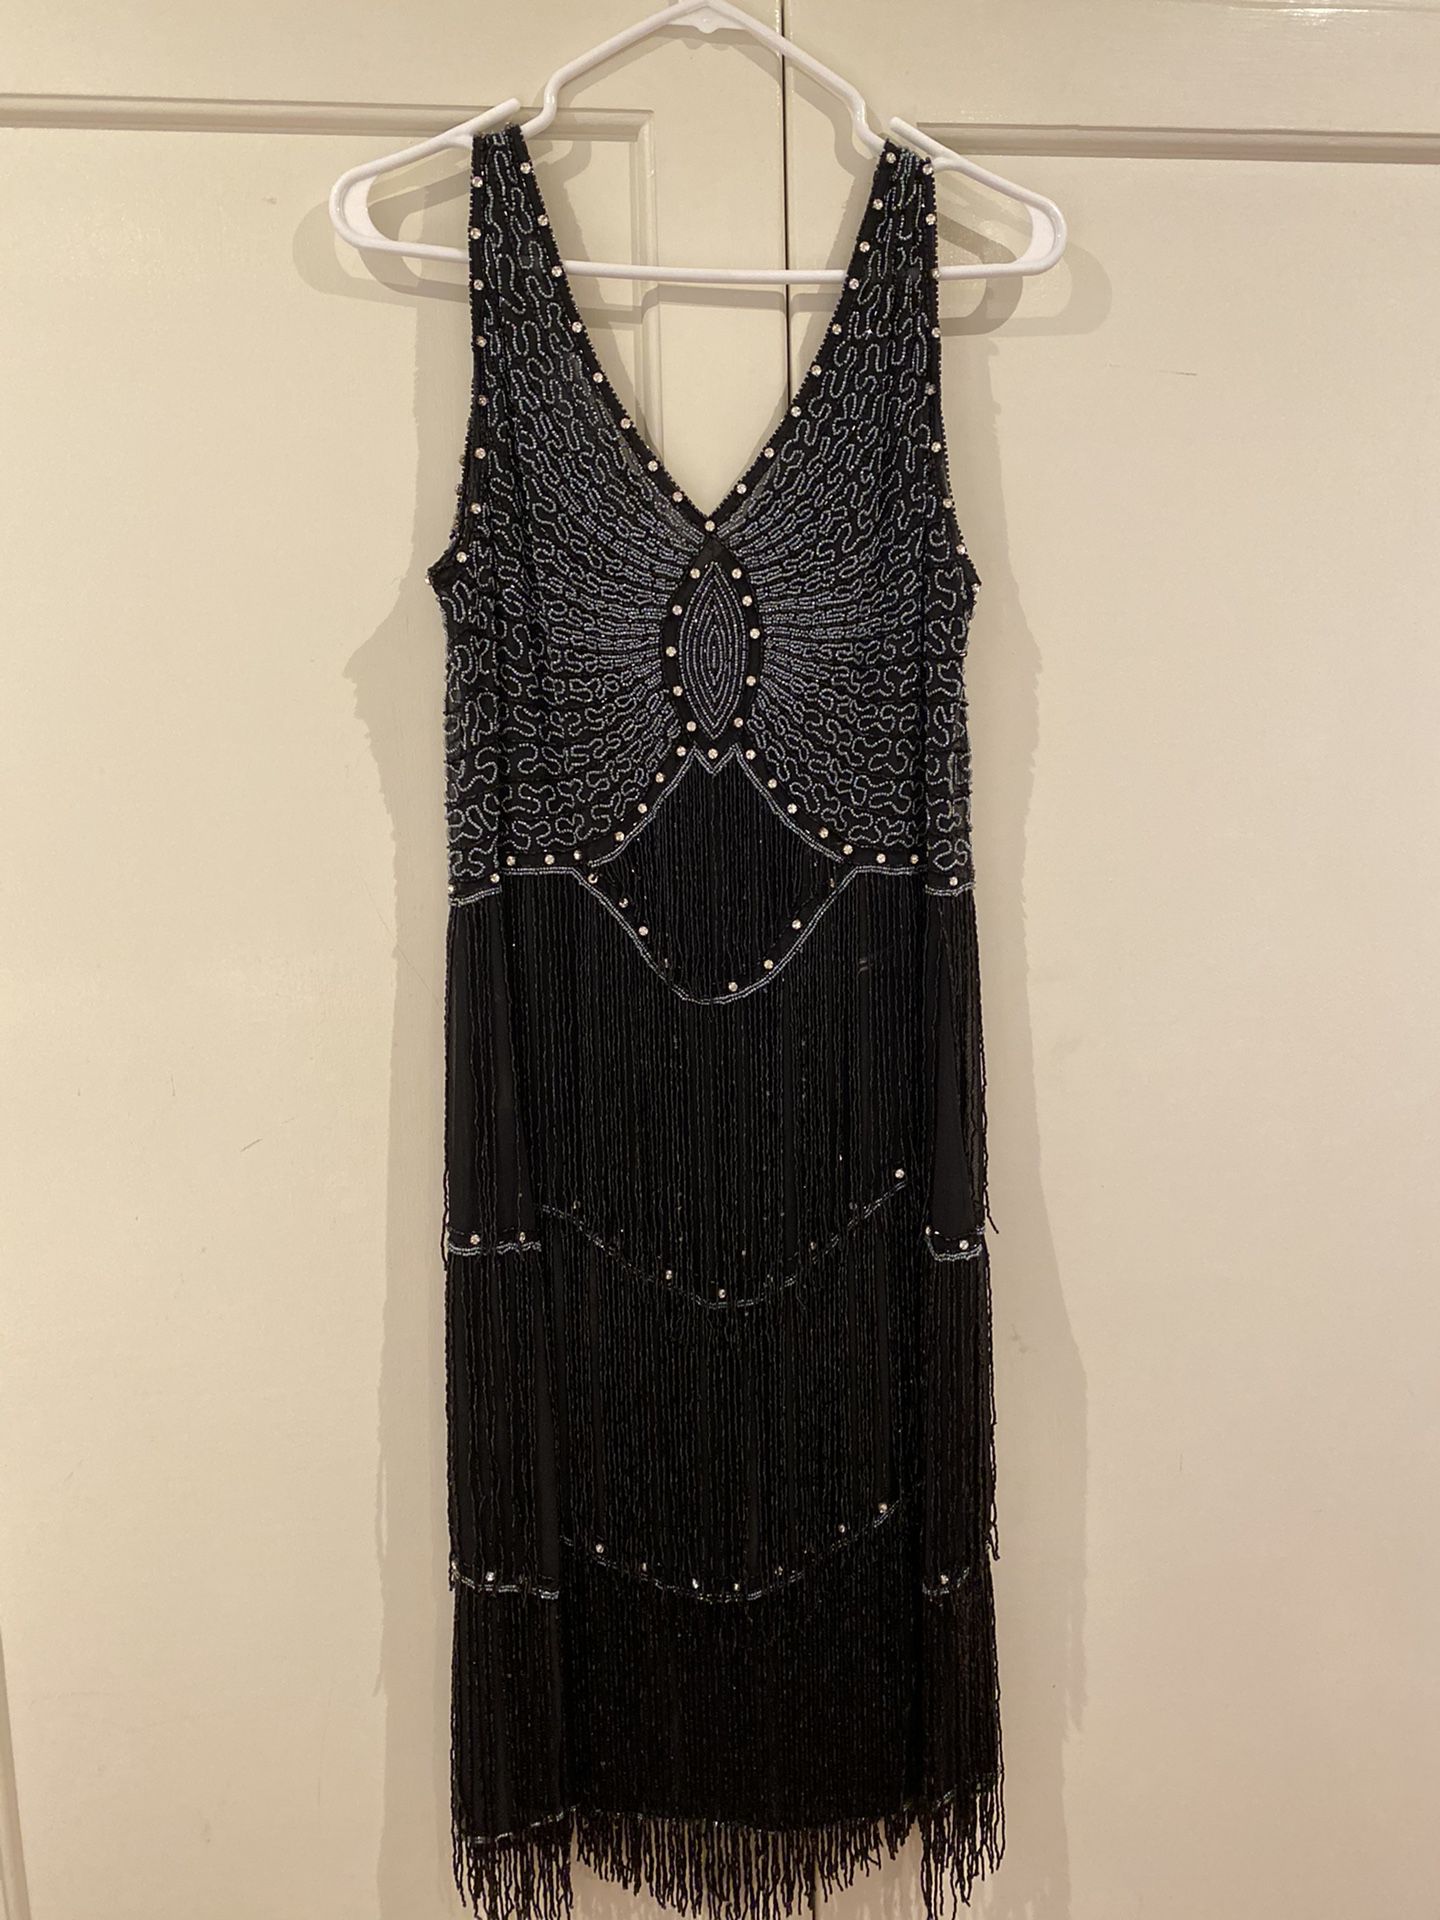 Beaded 20’s Style Flapper Dress w/ Feathered Headpiece